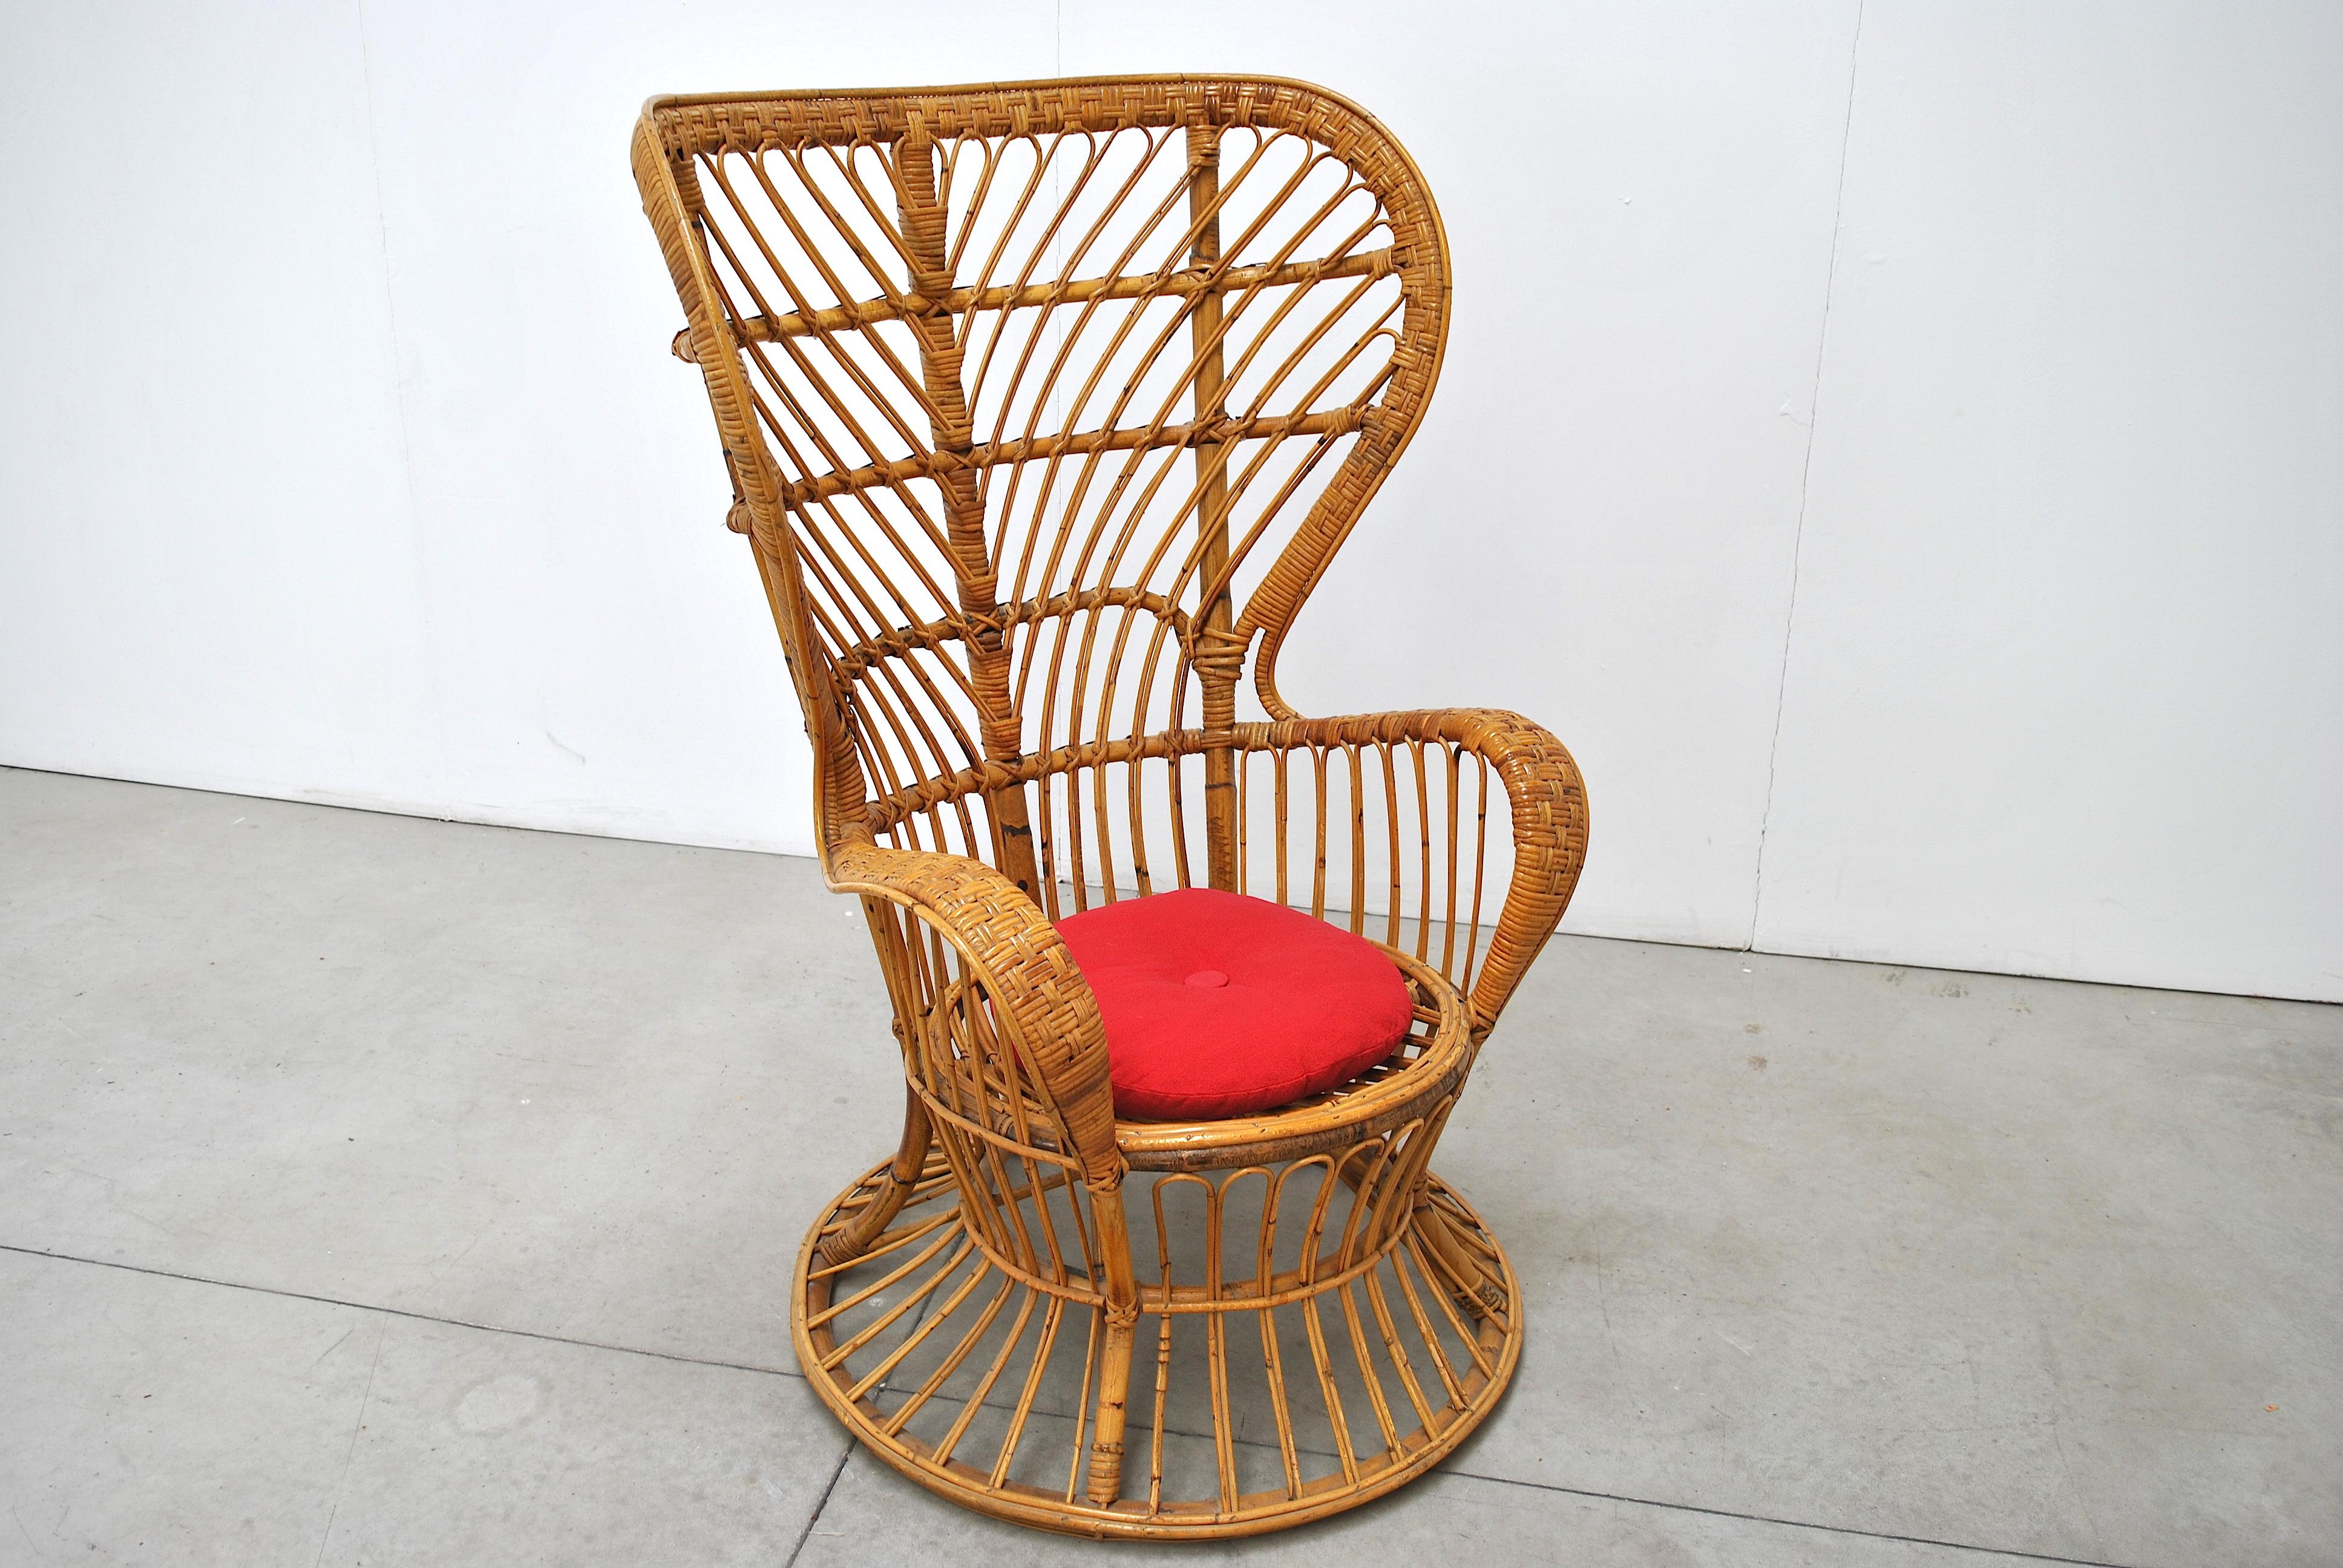 This Italian handcrafted wicker high-back armchair was designed by Lio Carminati & Gio Ponti in the 1950s and manufactured by Vittorio Bonacina. The item was specifically designed for the cruise ship Conte Biancamano.

These fabric on this chair